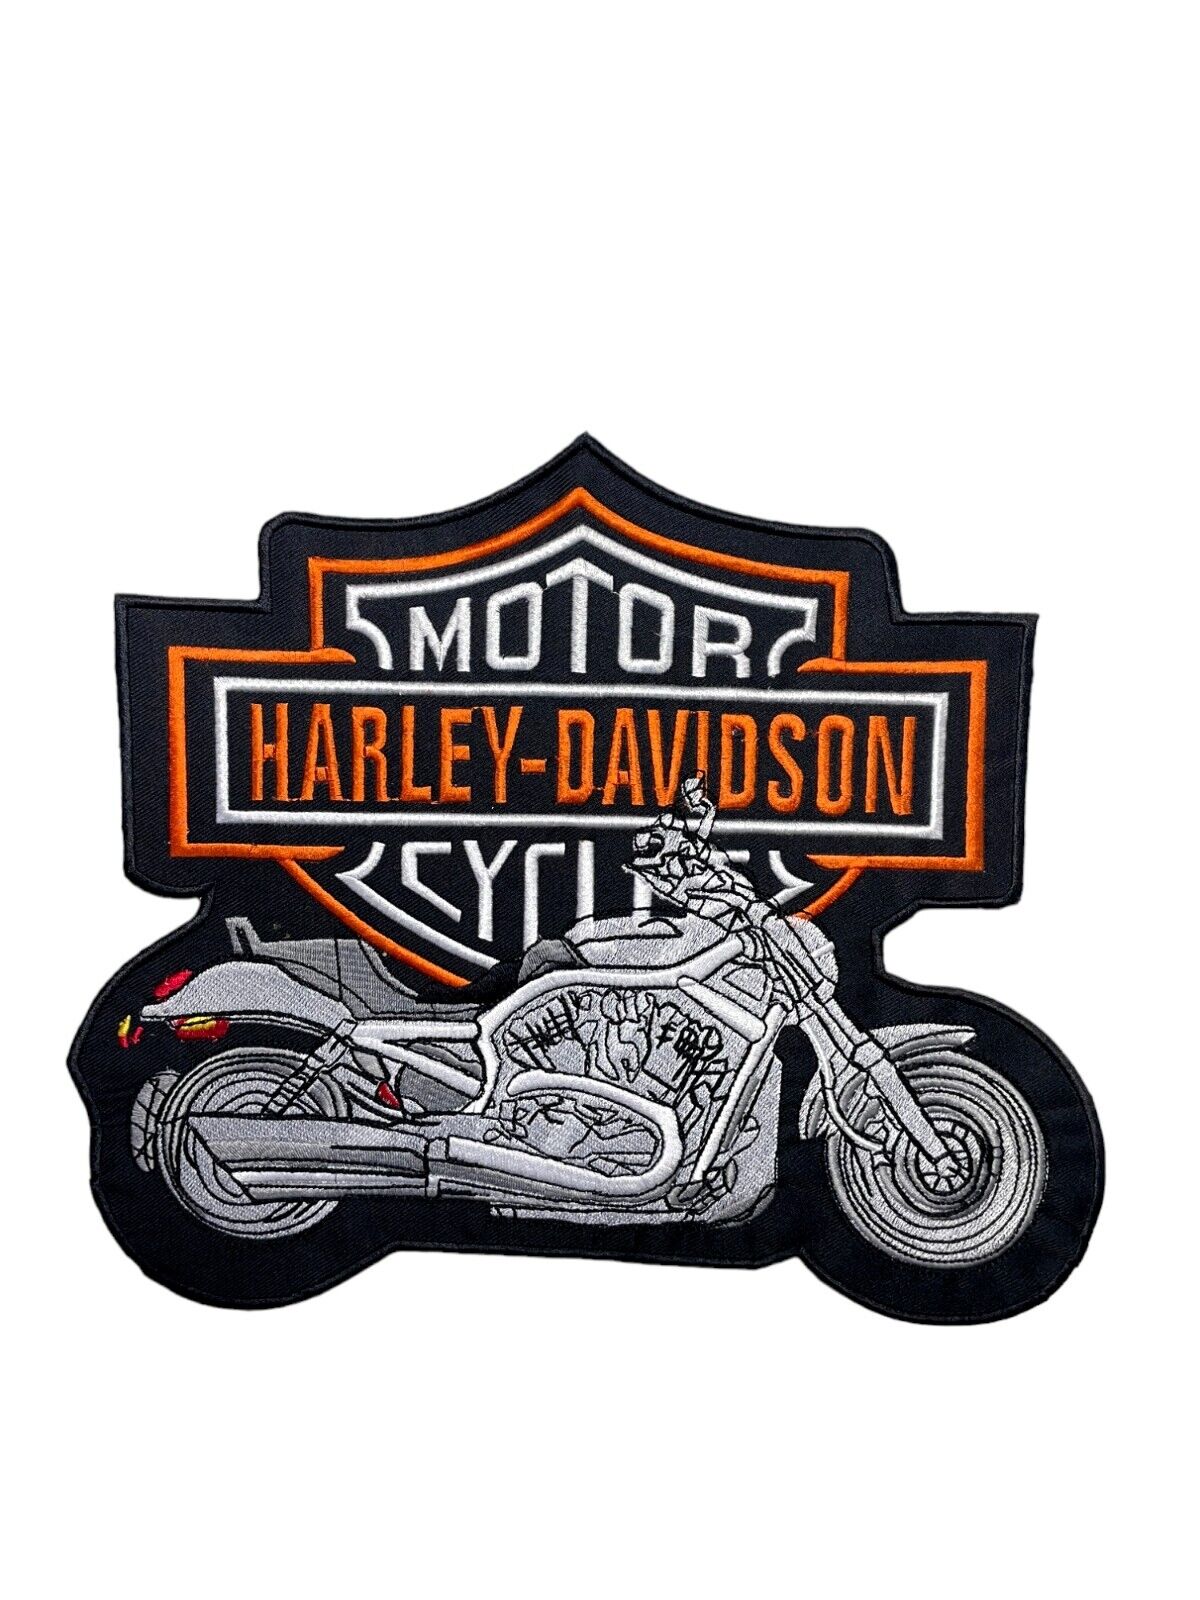 Harley Davidson Motorcycle Embroidered Patch Iron-Sew-On Patch Big Bike